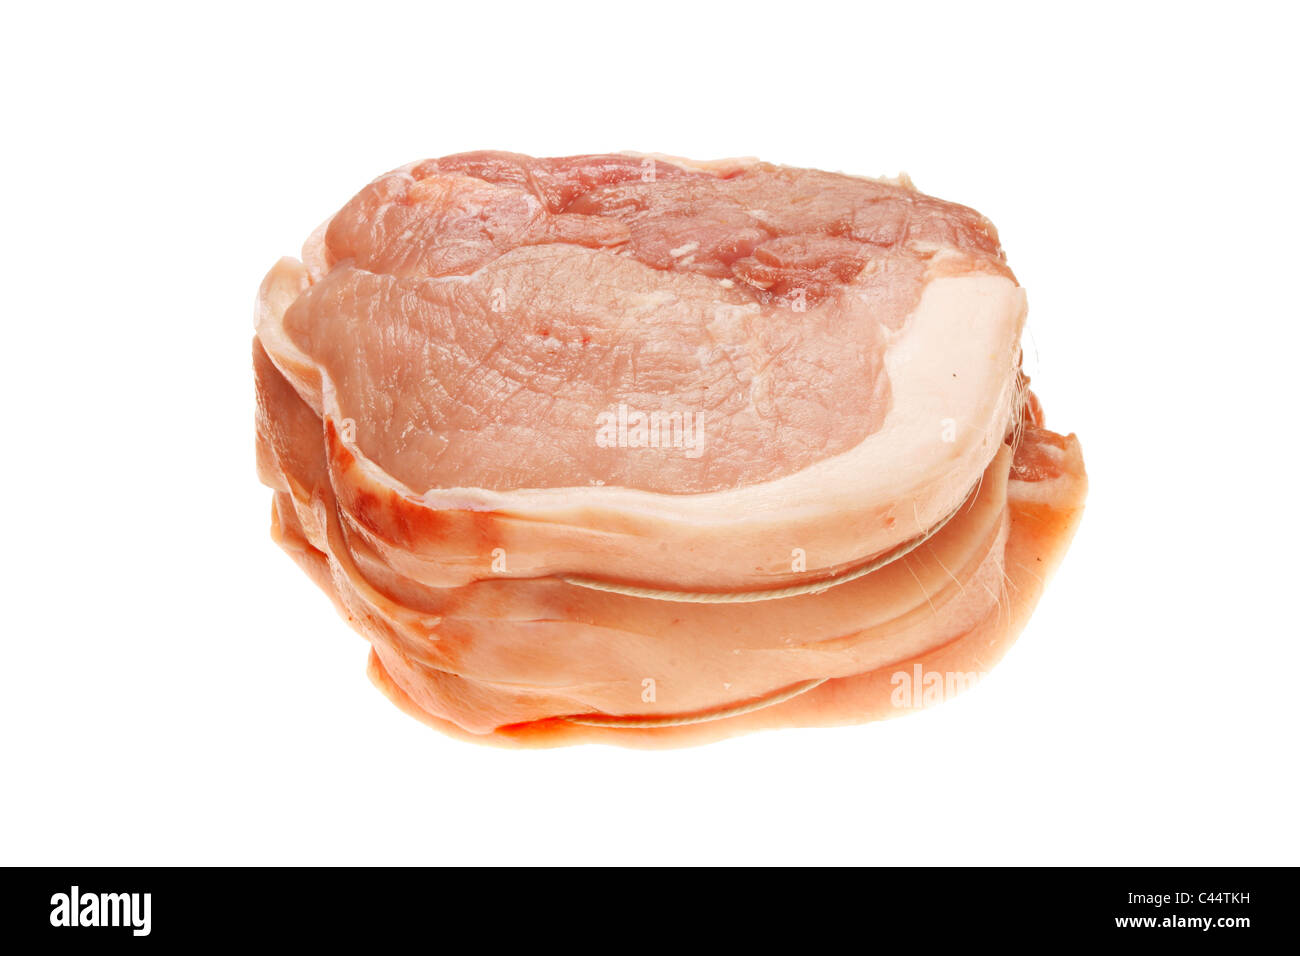 Pork joint showing skin side on white Stock Photo